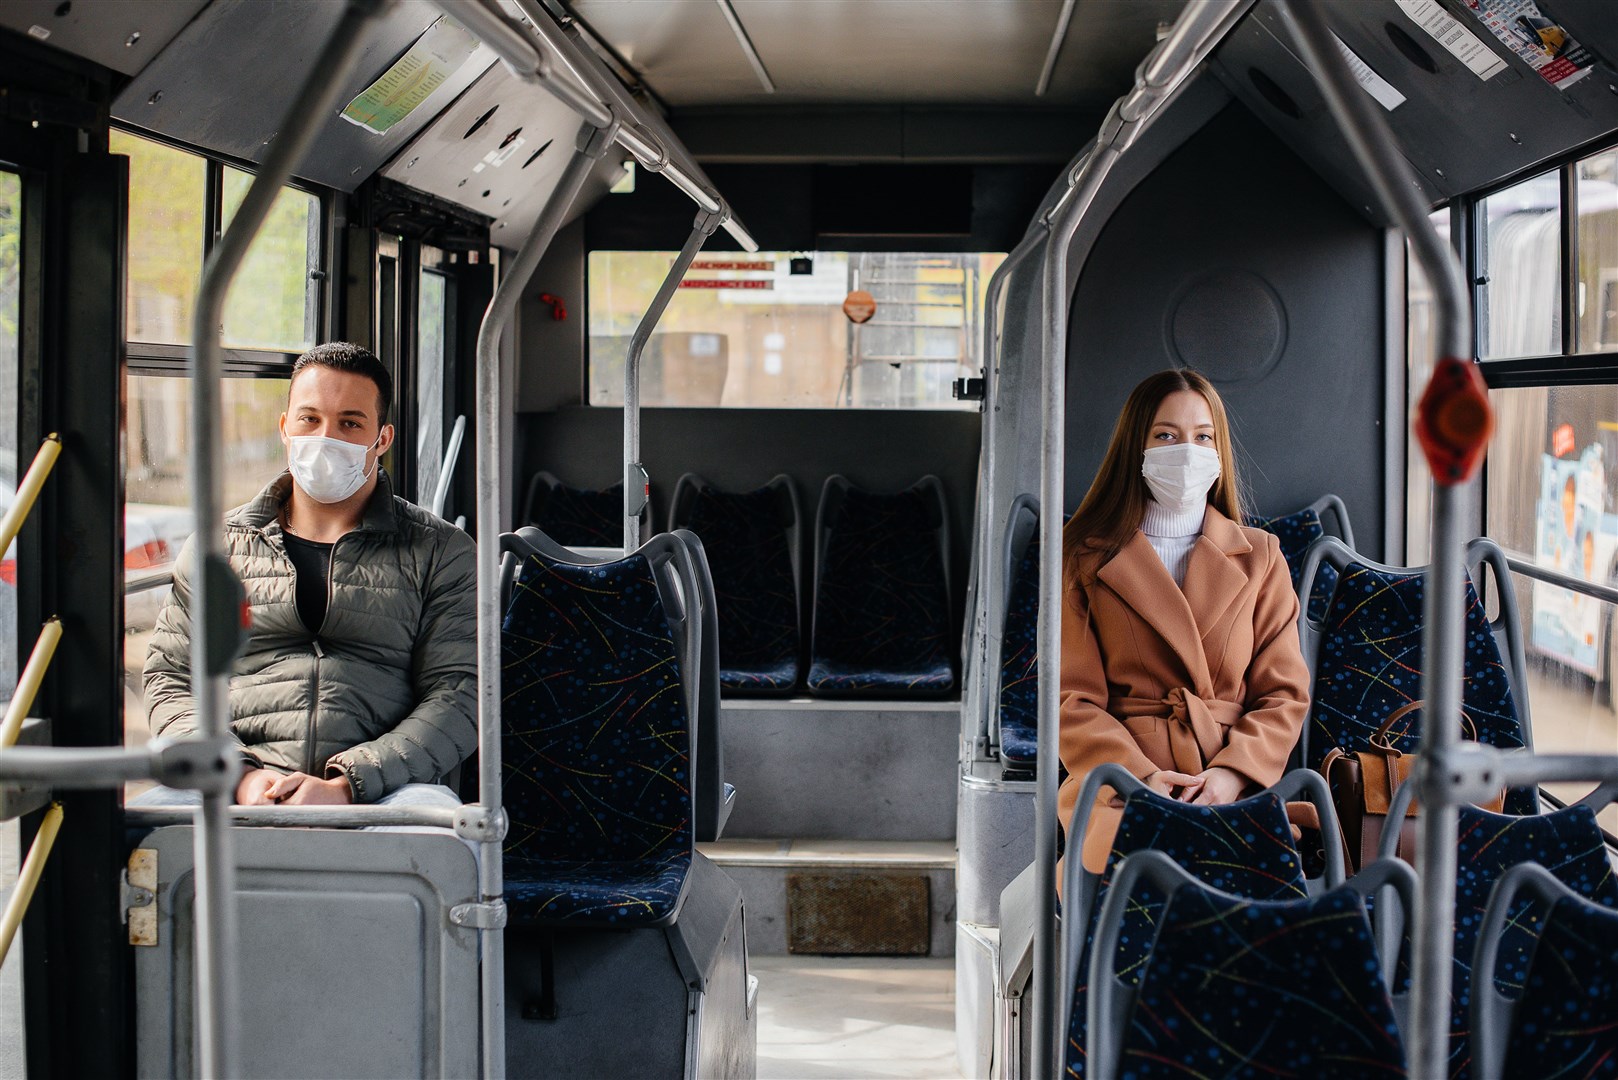 Passengers on public transport during the coronavirus pandemic keep their distance from each